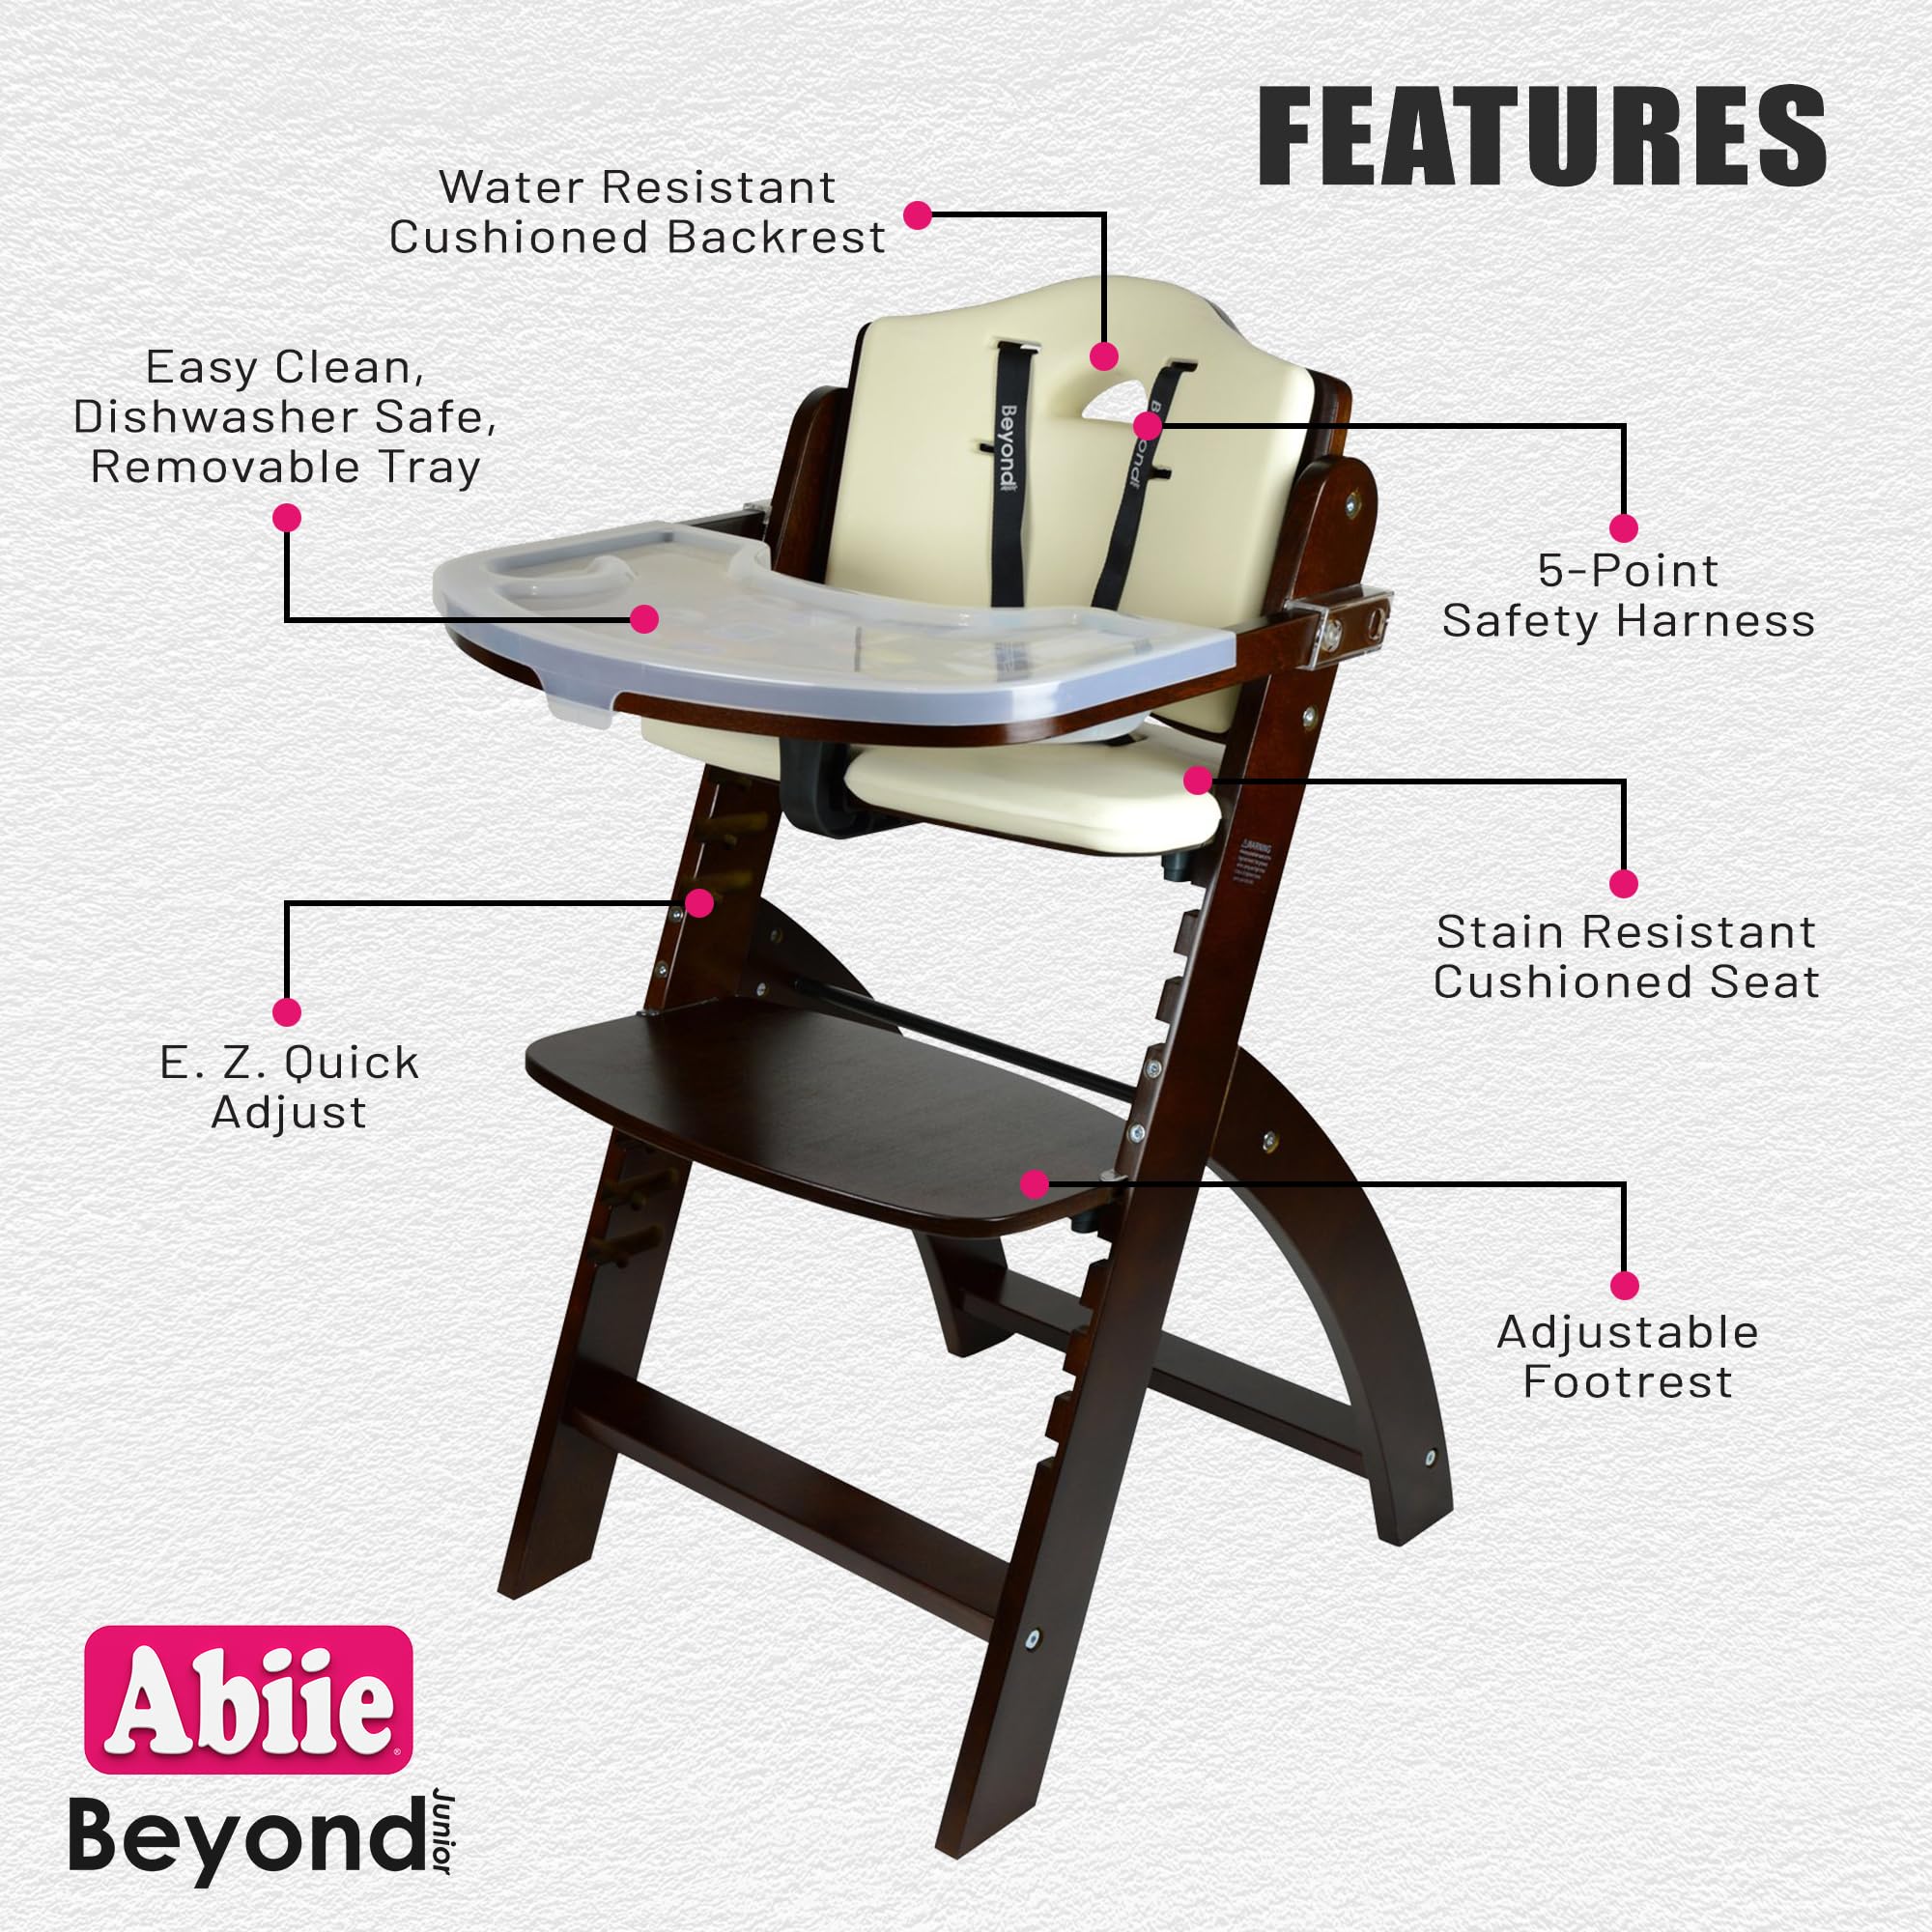 Abiie Beyond Junior Mahogany Wood/Cream Cushion Convertible 3-in-1 Wooden High Chairs for 6 Months to 250 lbs, and Ruby Wrapp Apricot Waterproof Silicone Bibs with Front Pocket - Baby Essentials